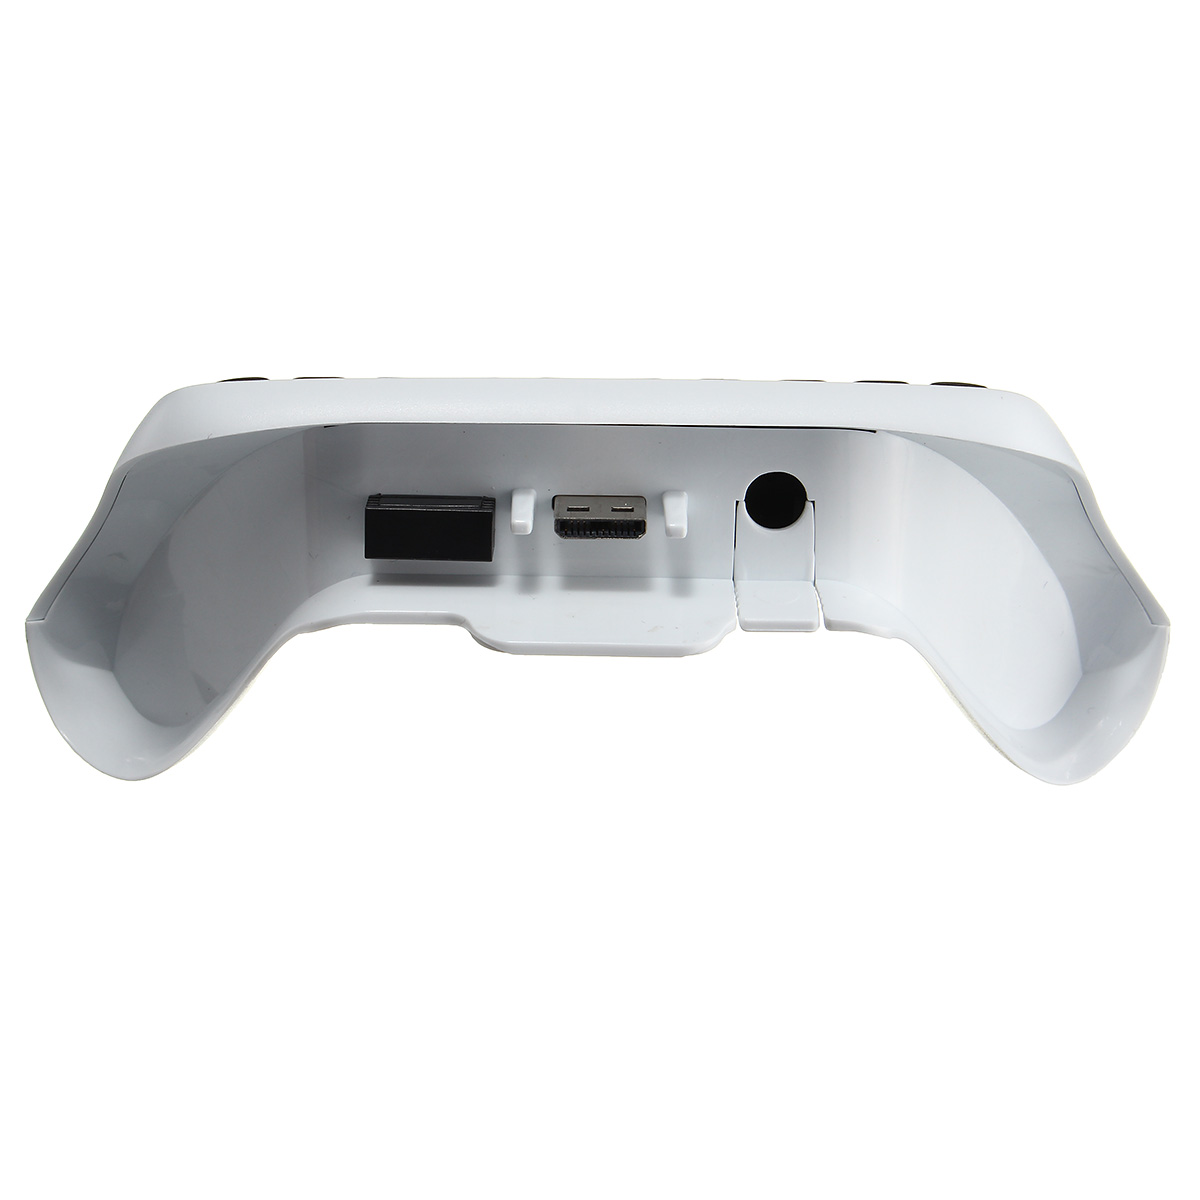 24G-White-Wireless-Message-Chatpad-Keyboard-KeyPad-For-Xbox-One-S-Controller-1162158